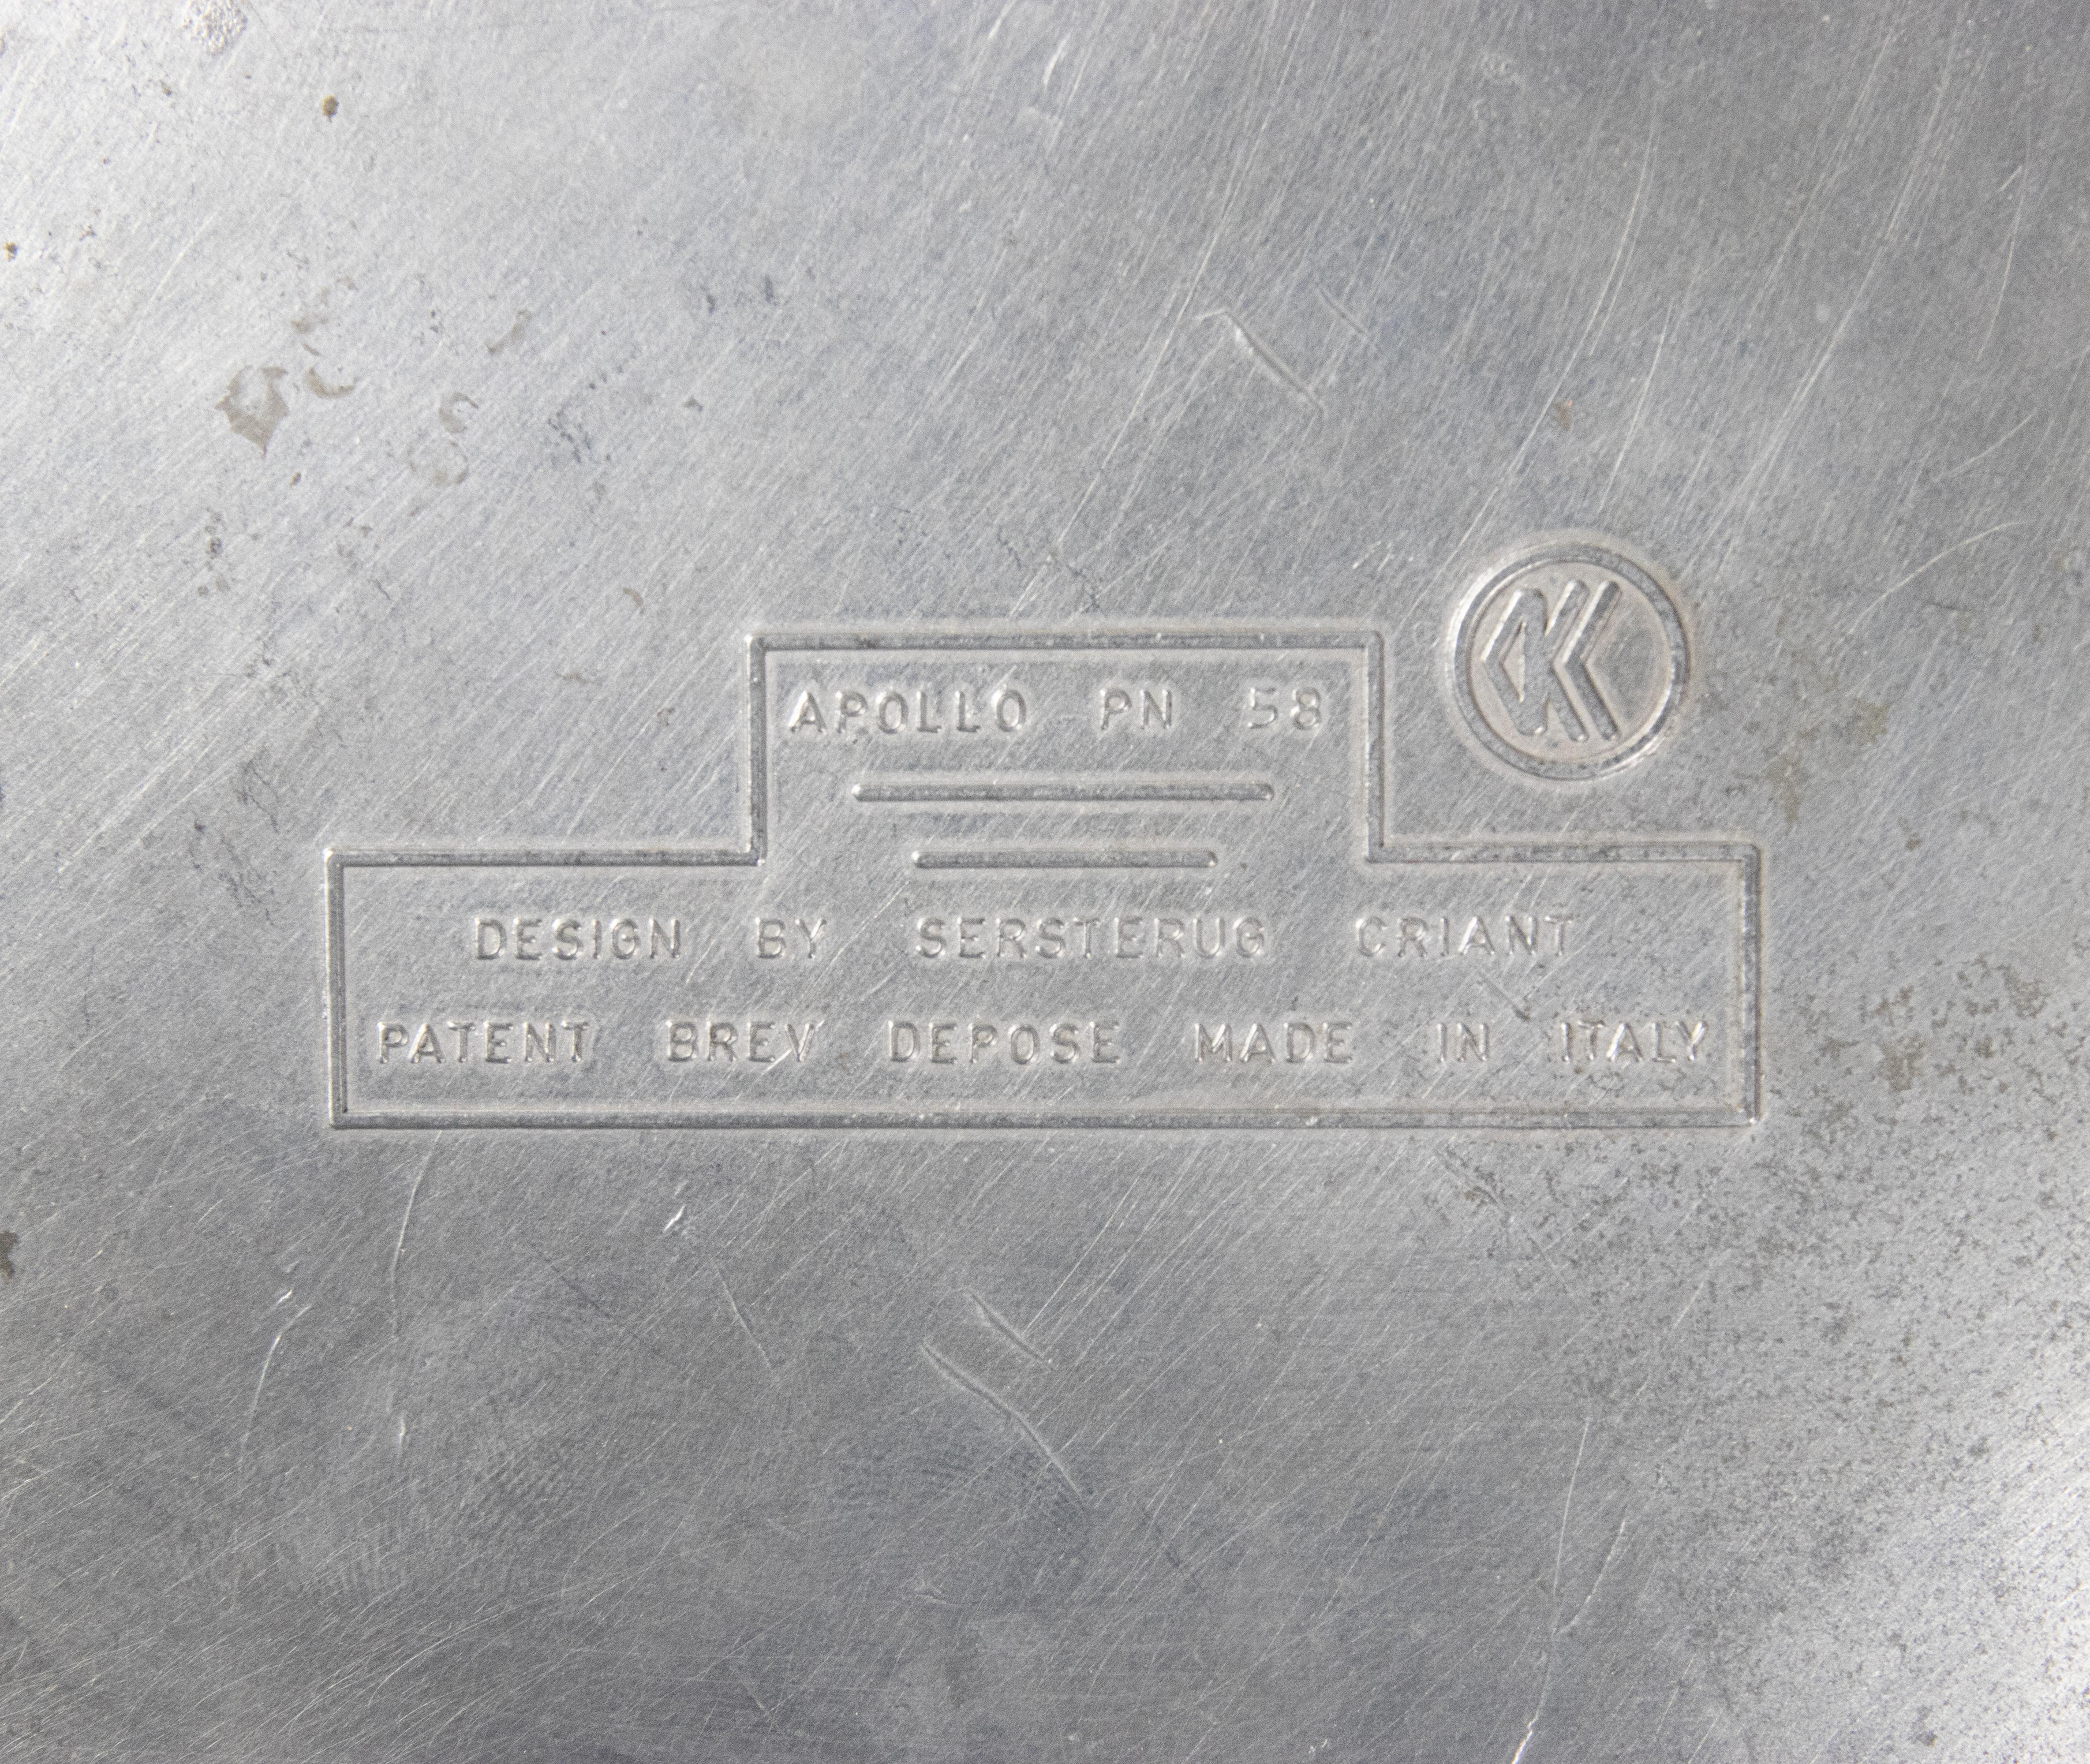 Mid-20th Century Solid and Machined Aluminum Apollo PN58 Ashtray by Sersterug Criant, 1960s For Sale